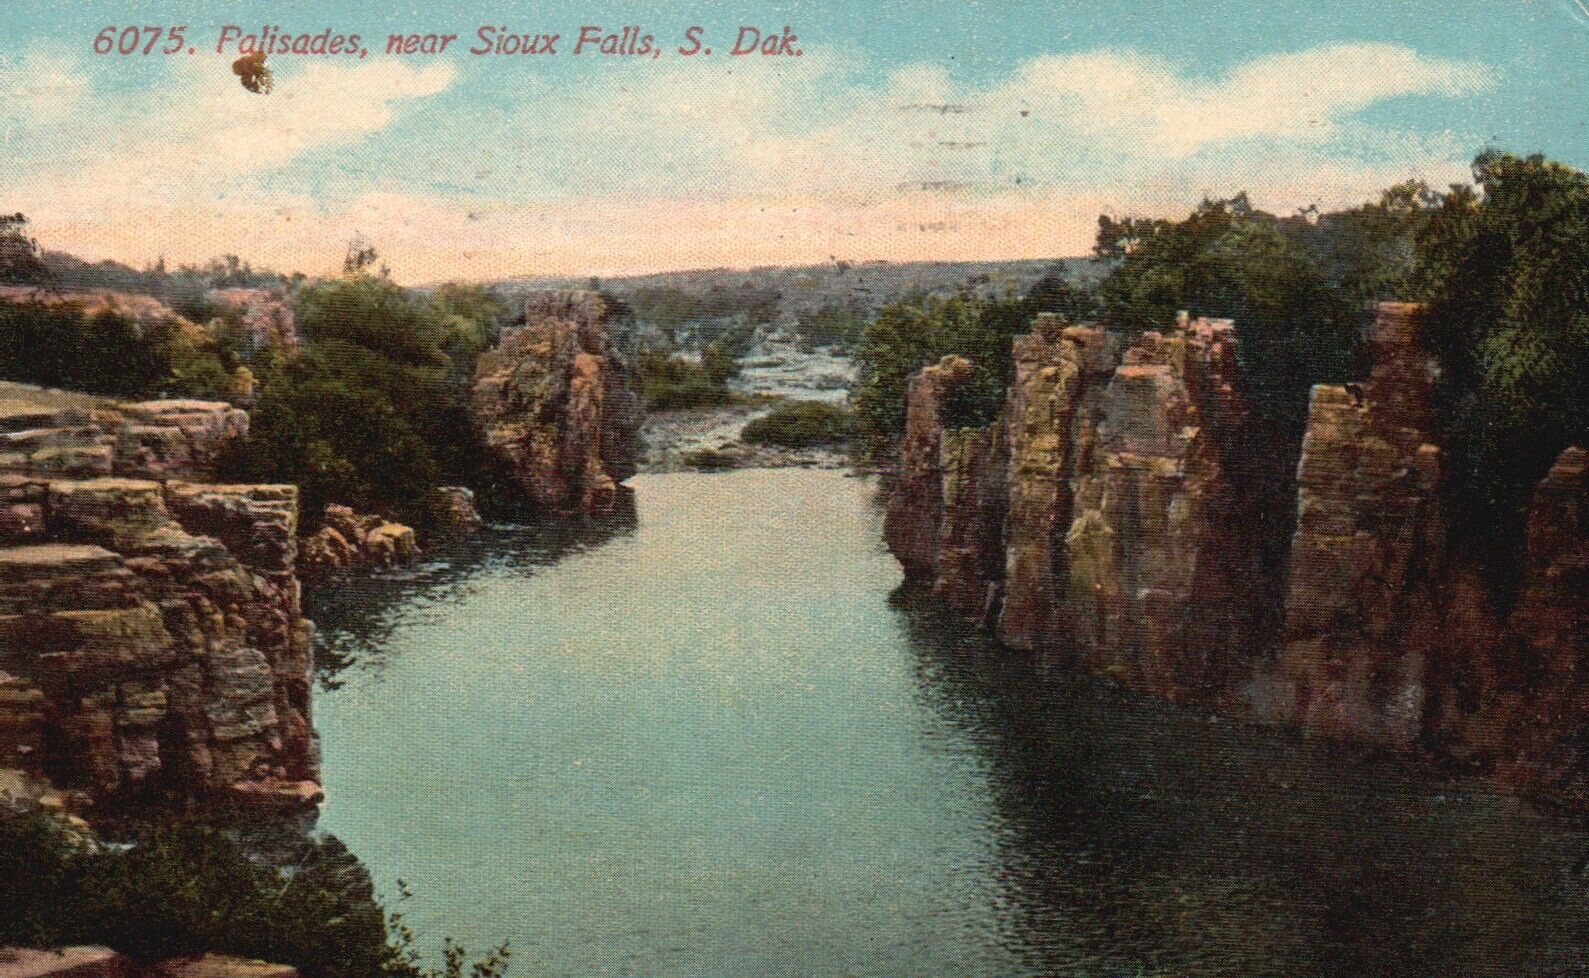 Postcard SD near Sioux Falls Palisades Posted 1914 Divided Back Vintage PC K420